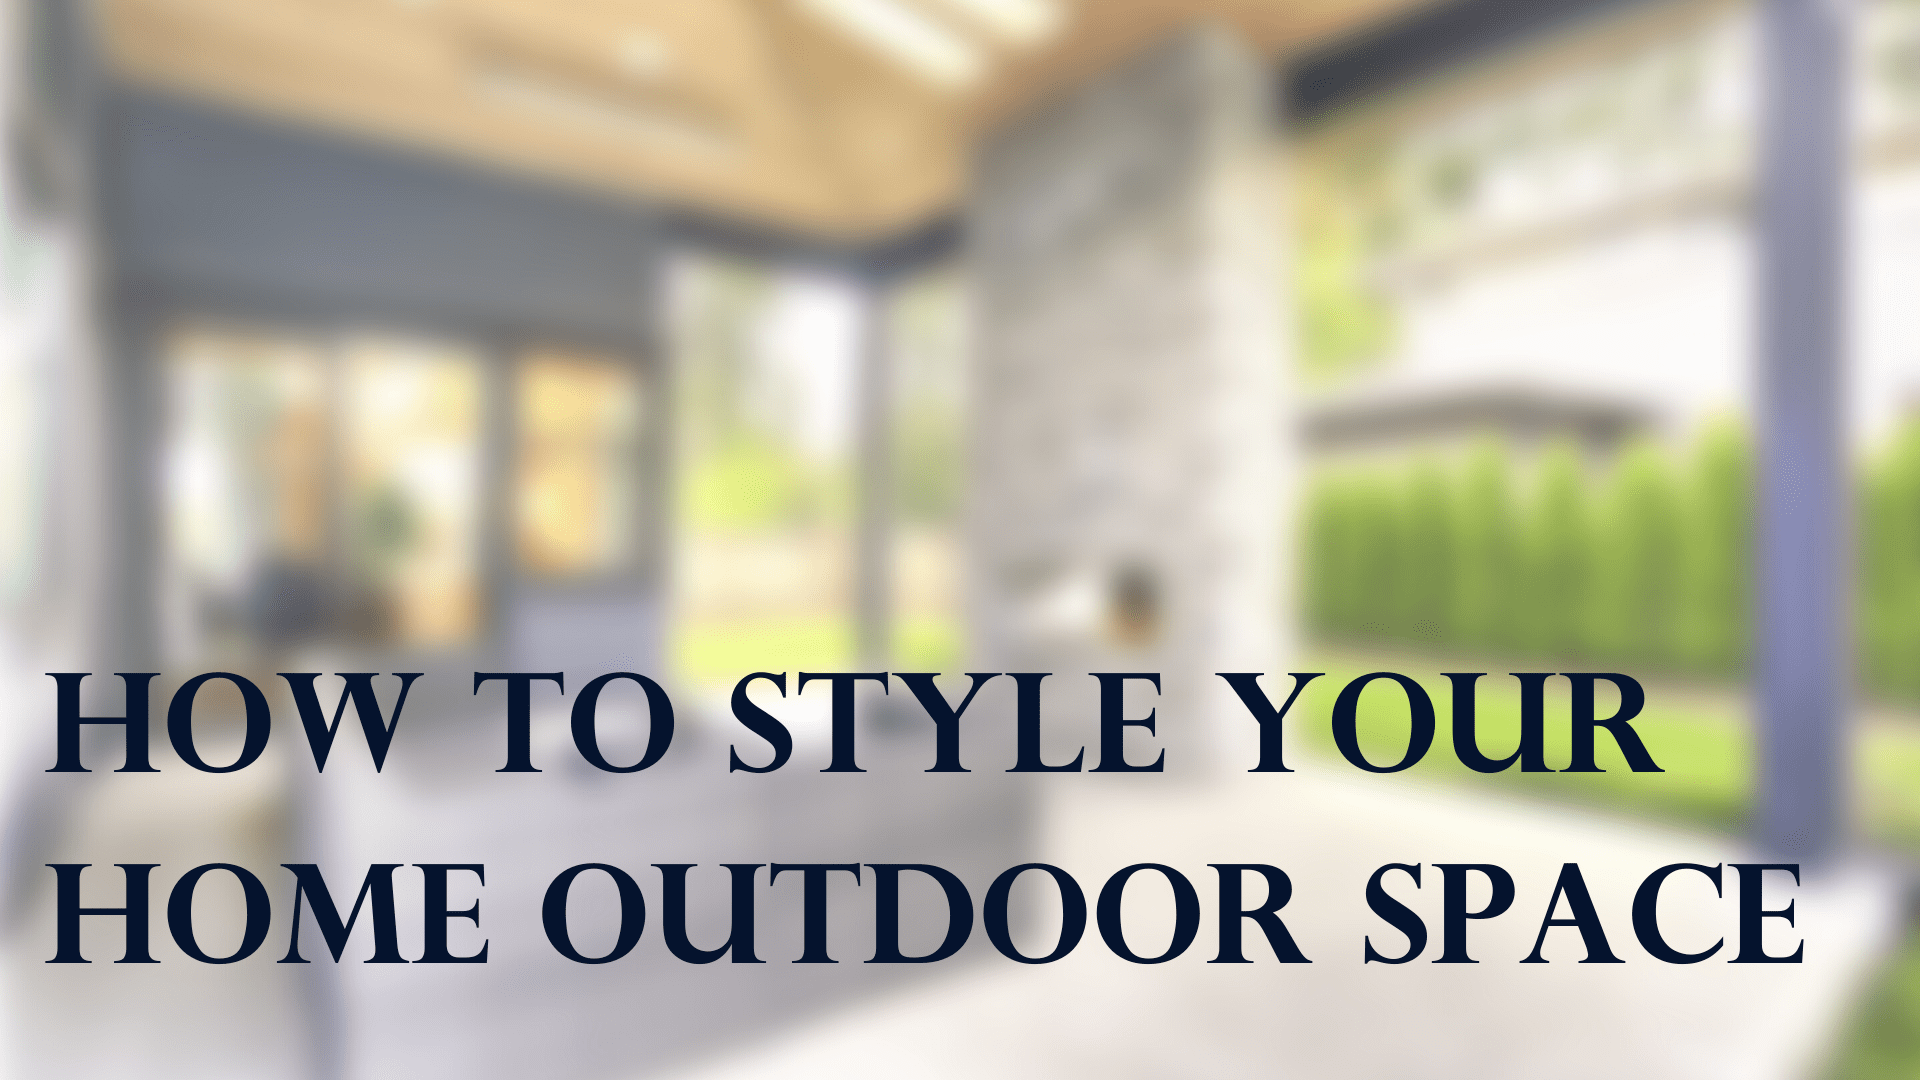 How to Style Your Home Outdoor Space